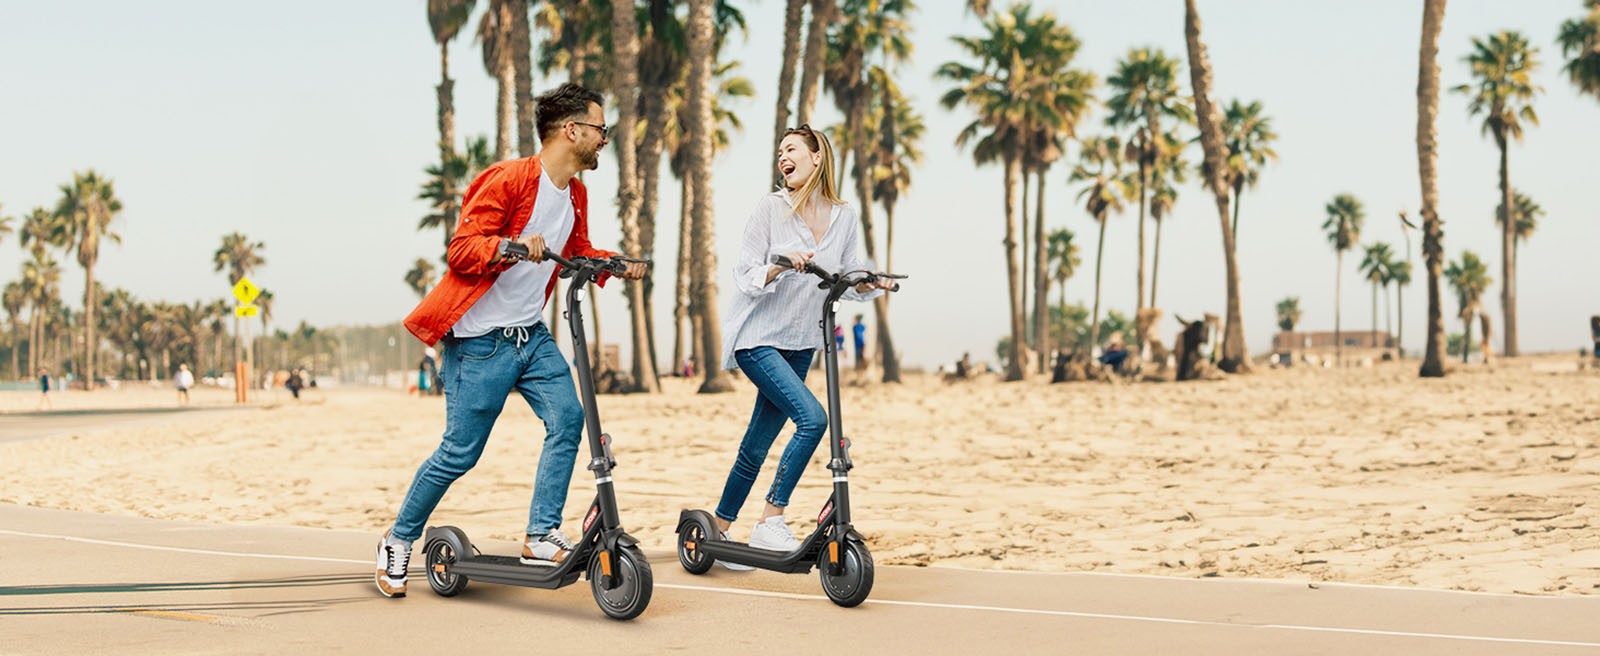 Atomi E20 Foldable Electric Scooter, 8.5 inch Air Tire, 250W Motor (Max Output 500W), 36V 7.5Ah Battery